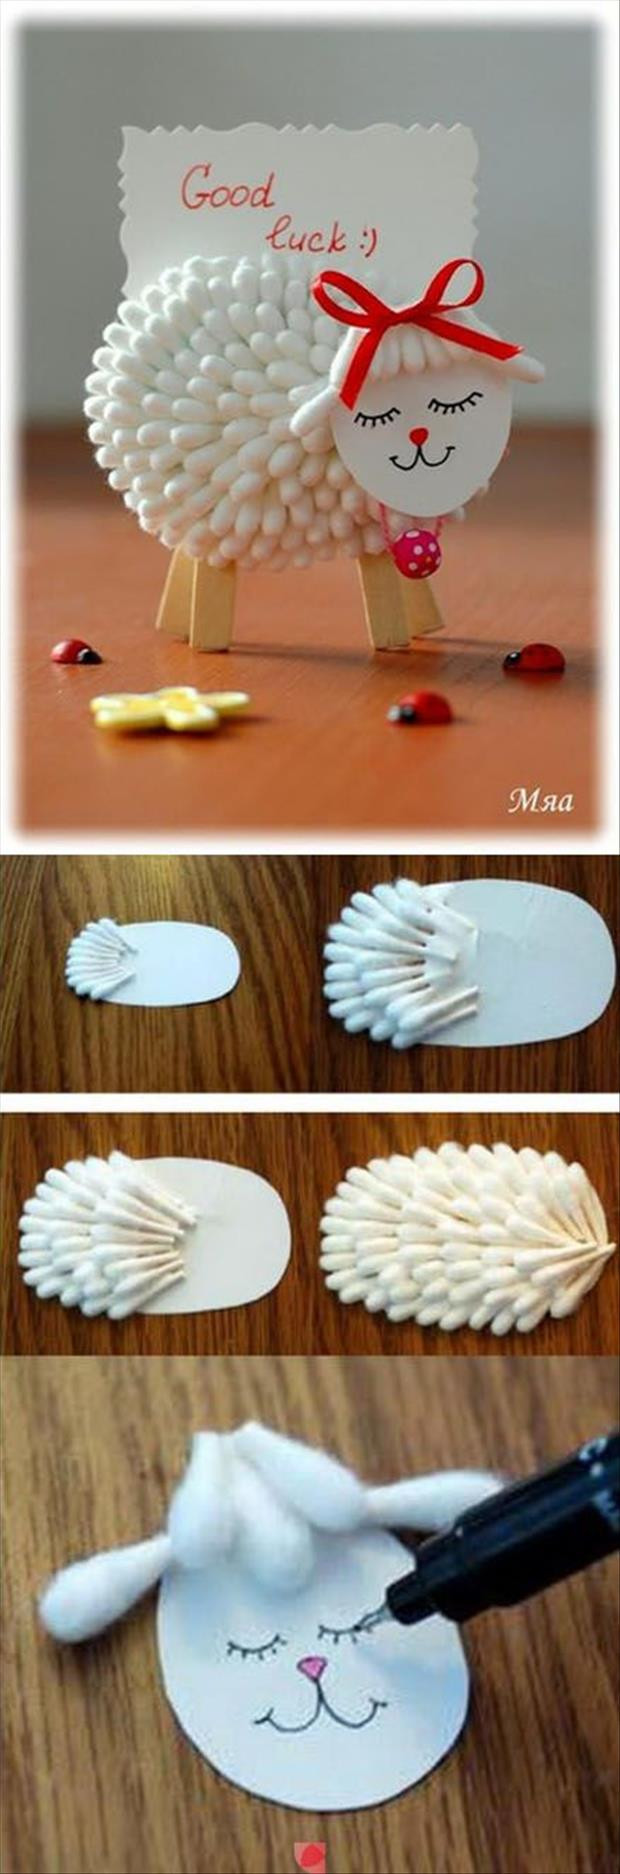 Easy Do It Yourself Projects For Kids
 Fun Do It Yourself Craft Ideas 30 Pics